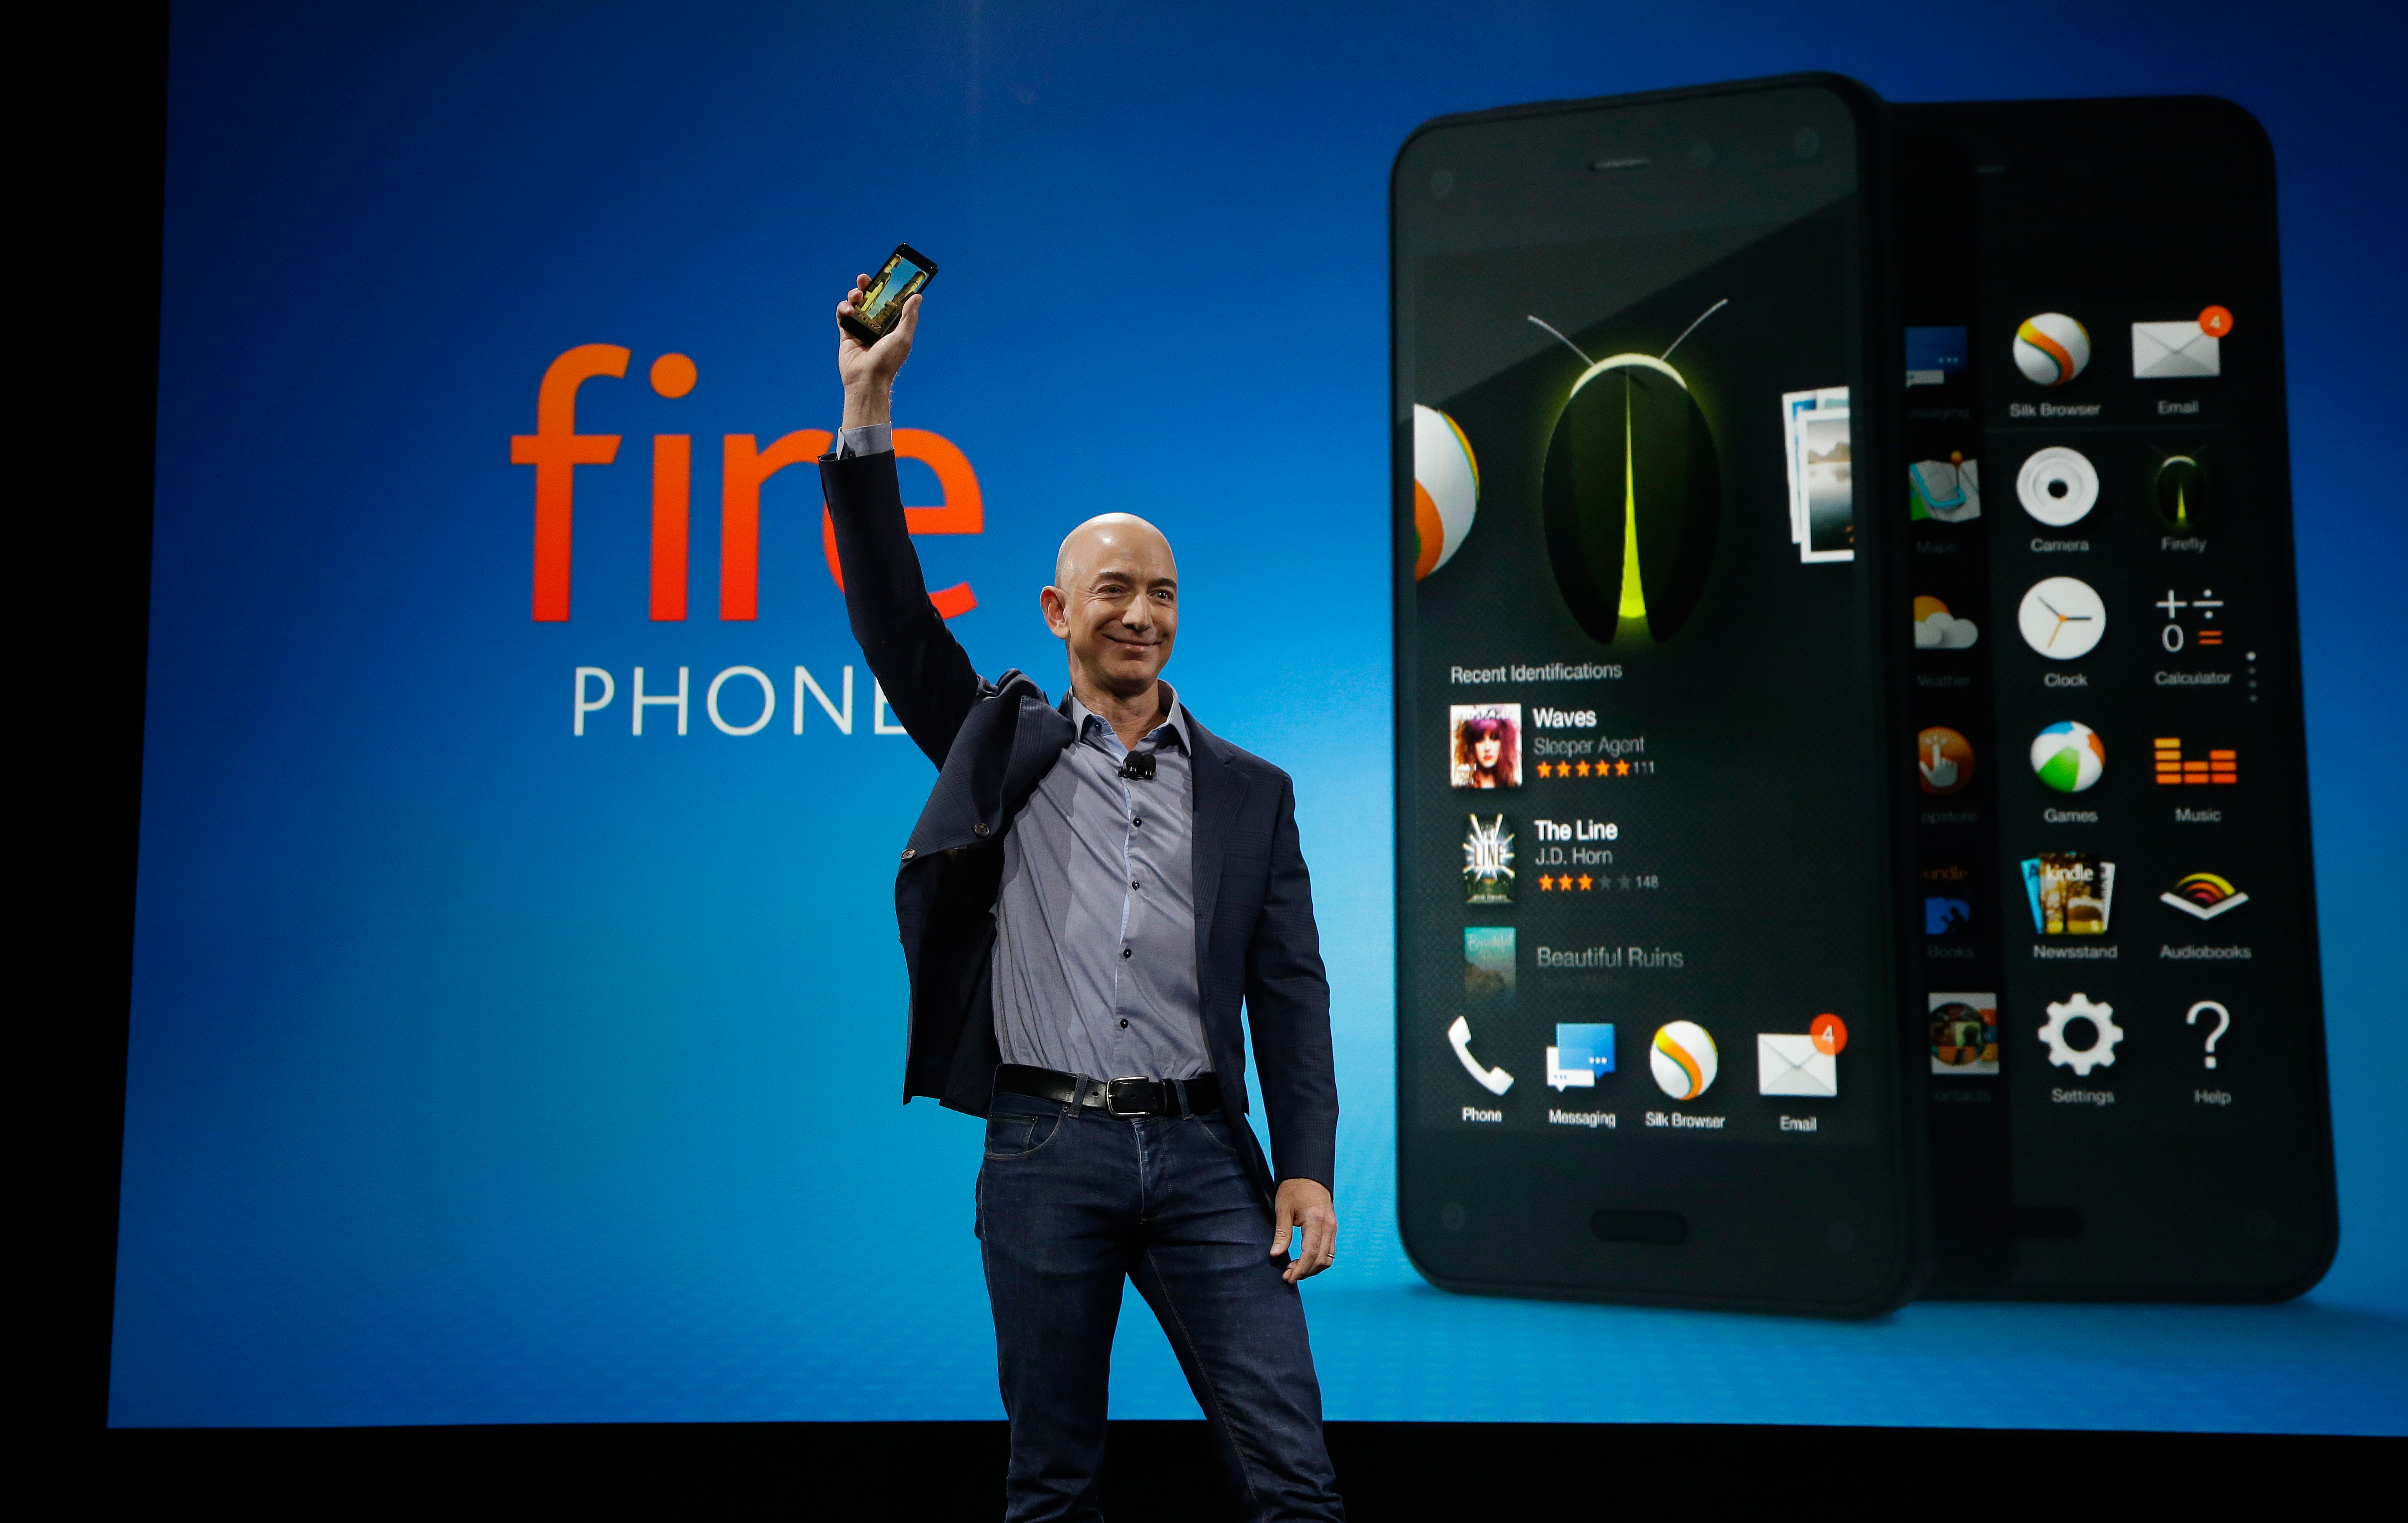 Amazon CEO Jeff Bezos holds up the new Amazon Fire Phone at a launch event, Wednesday, June 18, 2014, in Seattle.